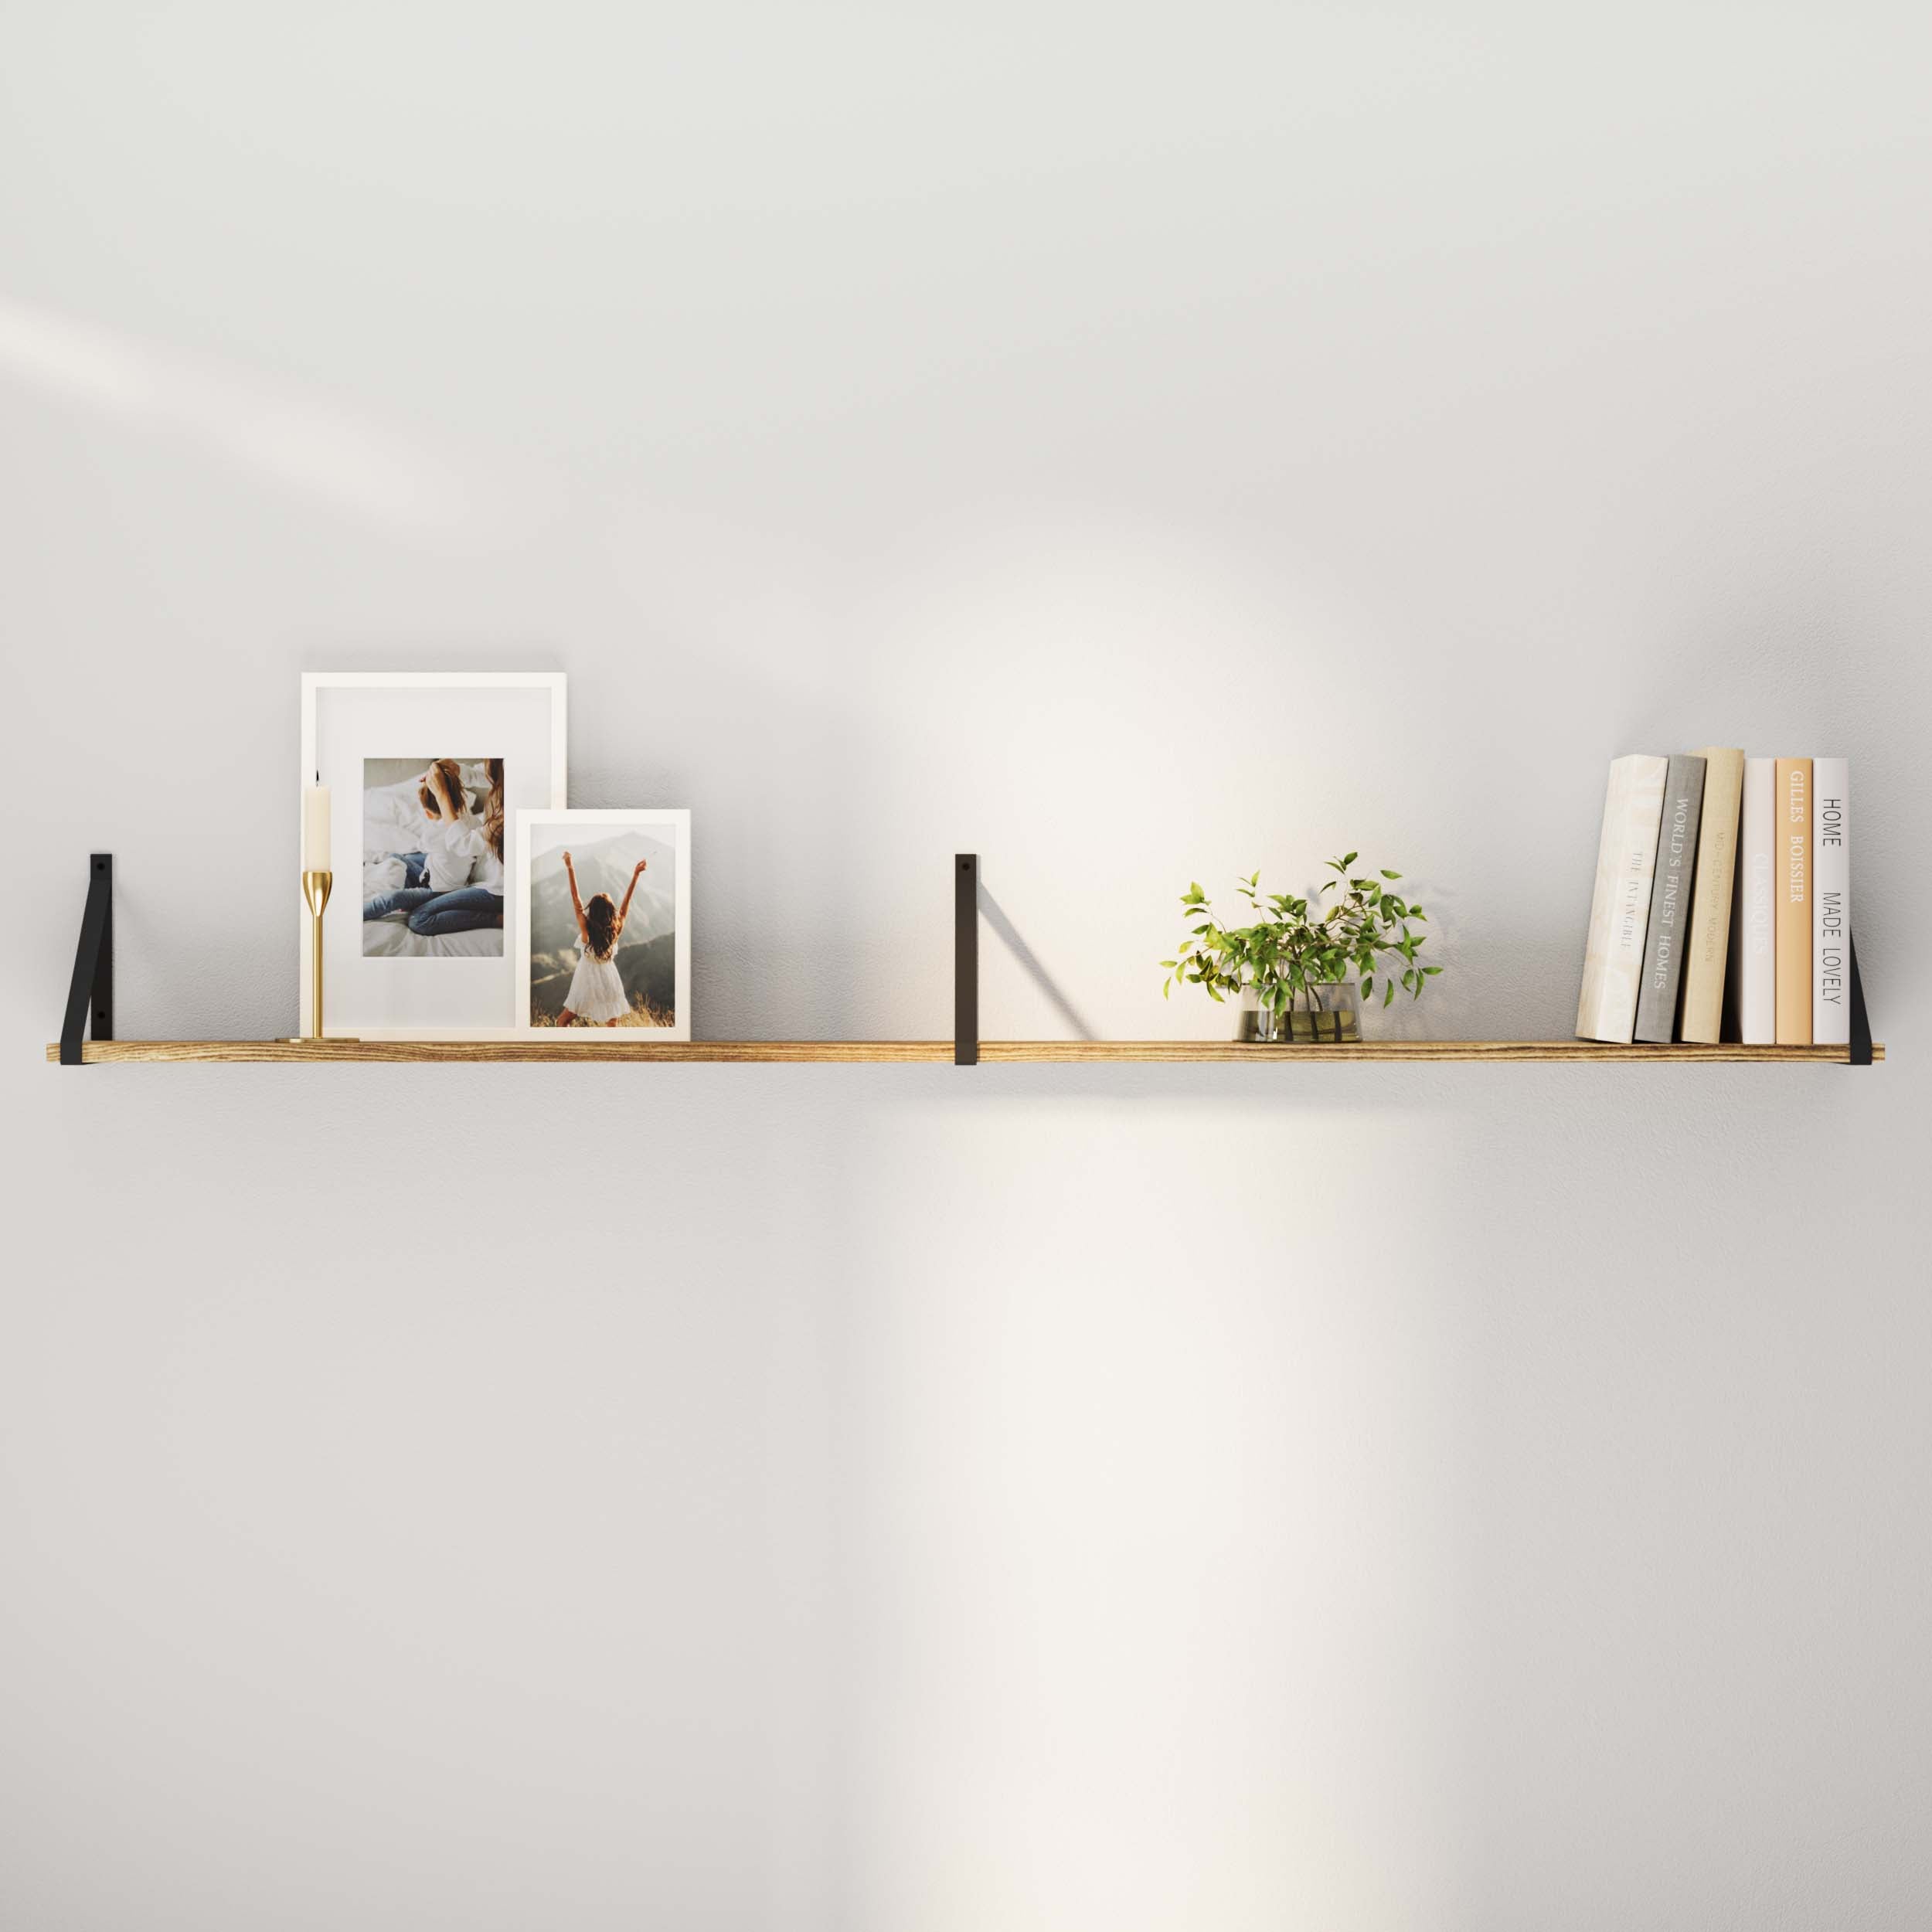 A burnt floating shelf against a white wall, featuring two framed photographs, a small potted plant, and a row of books.